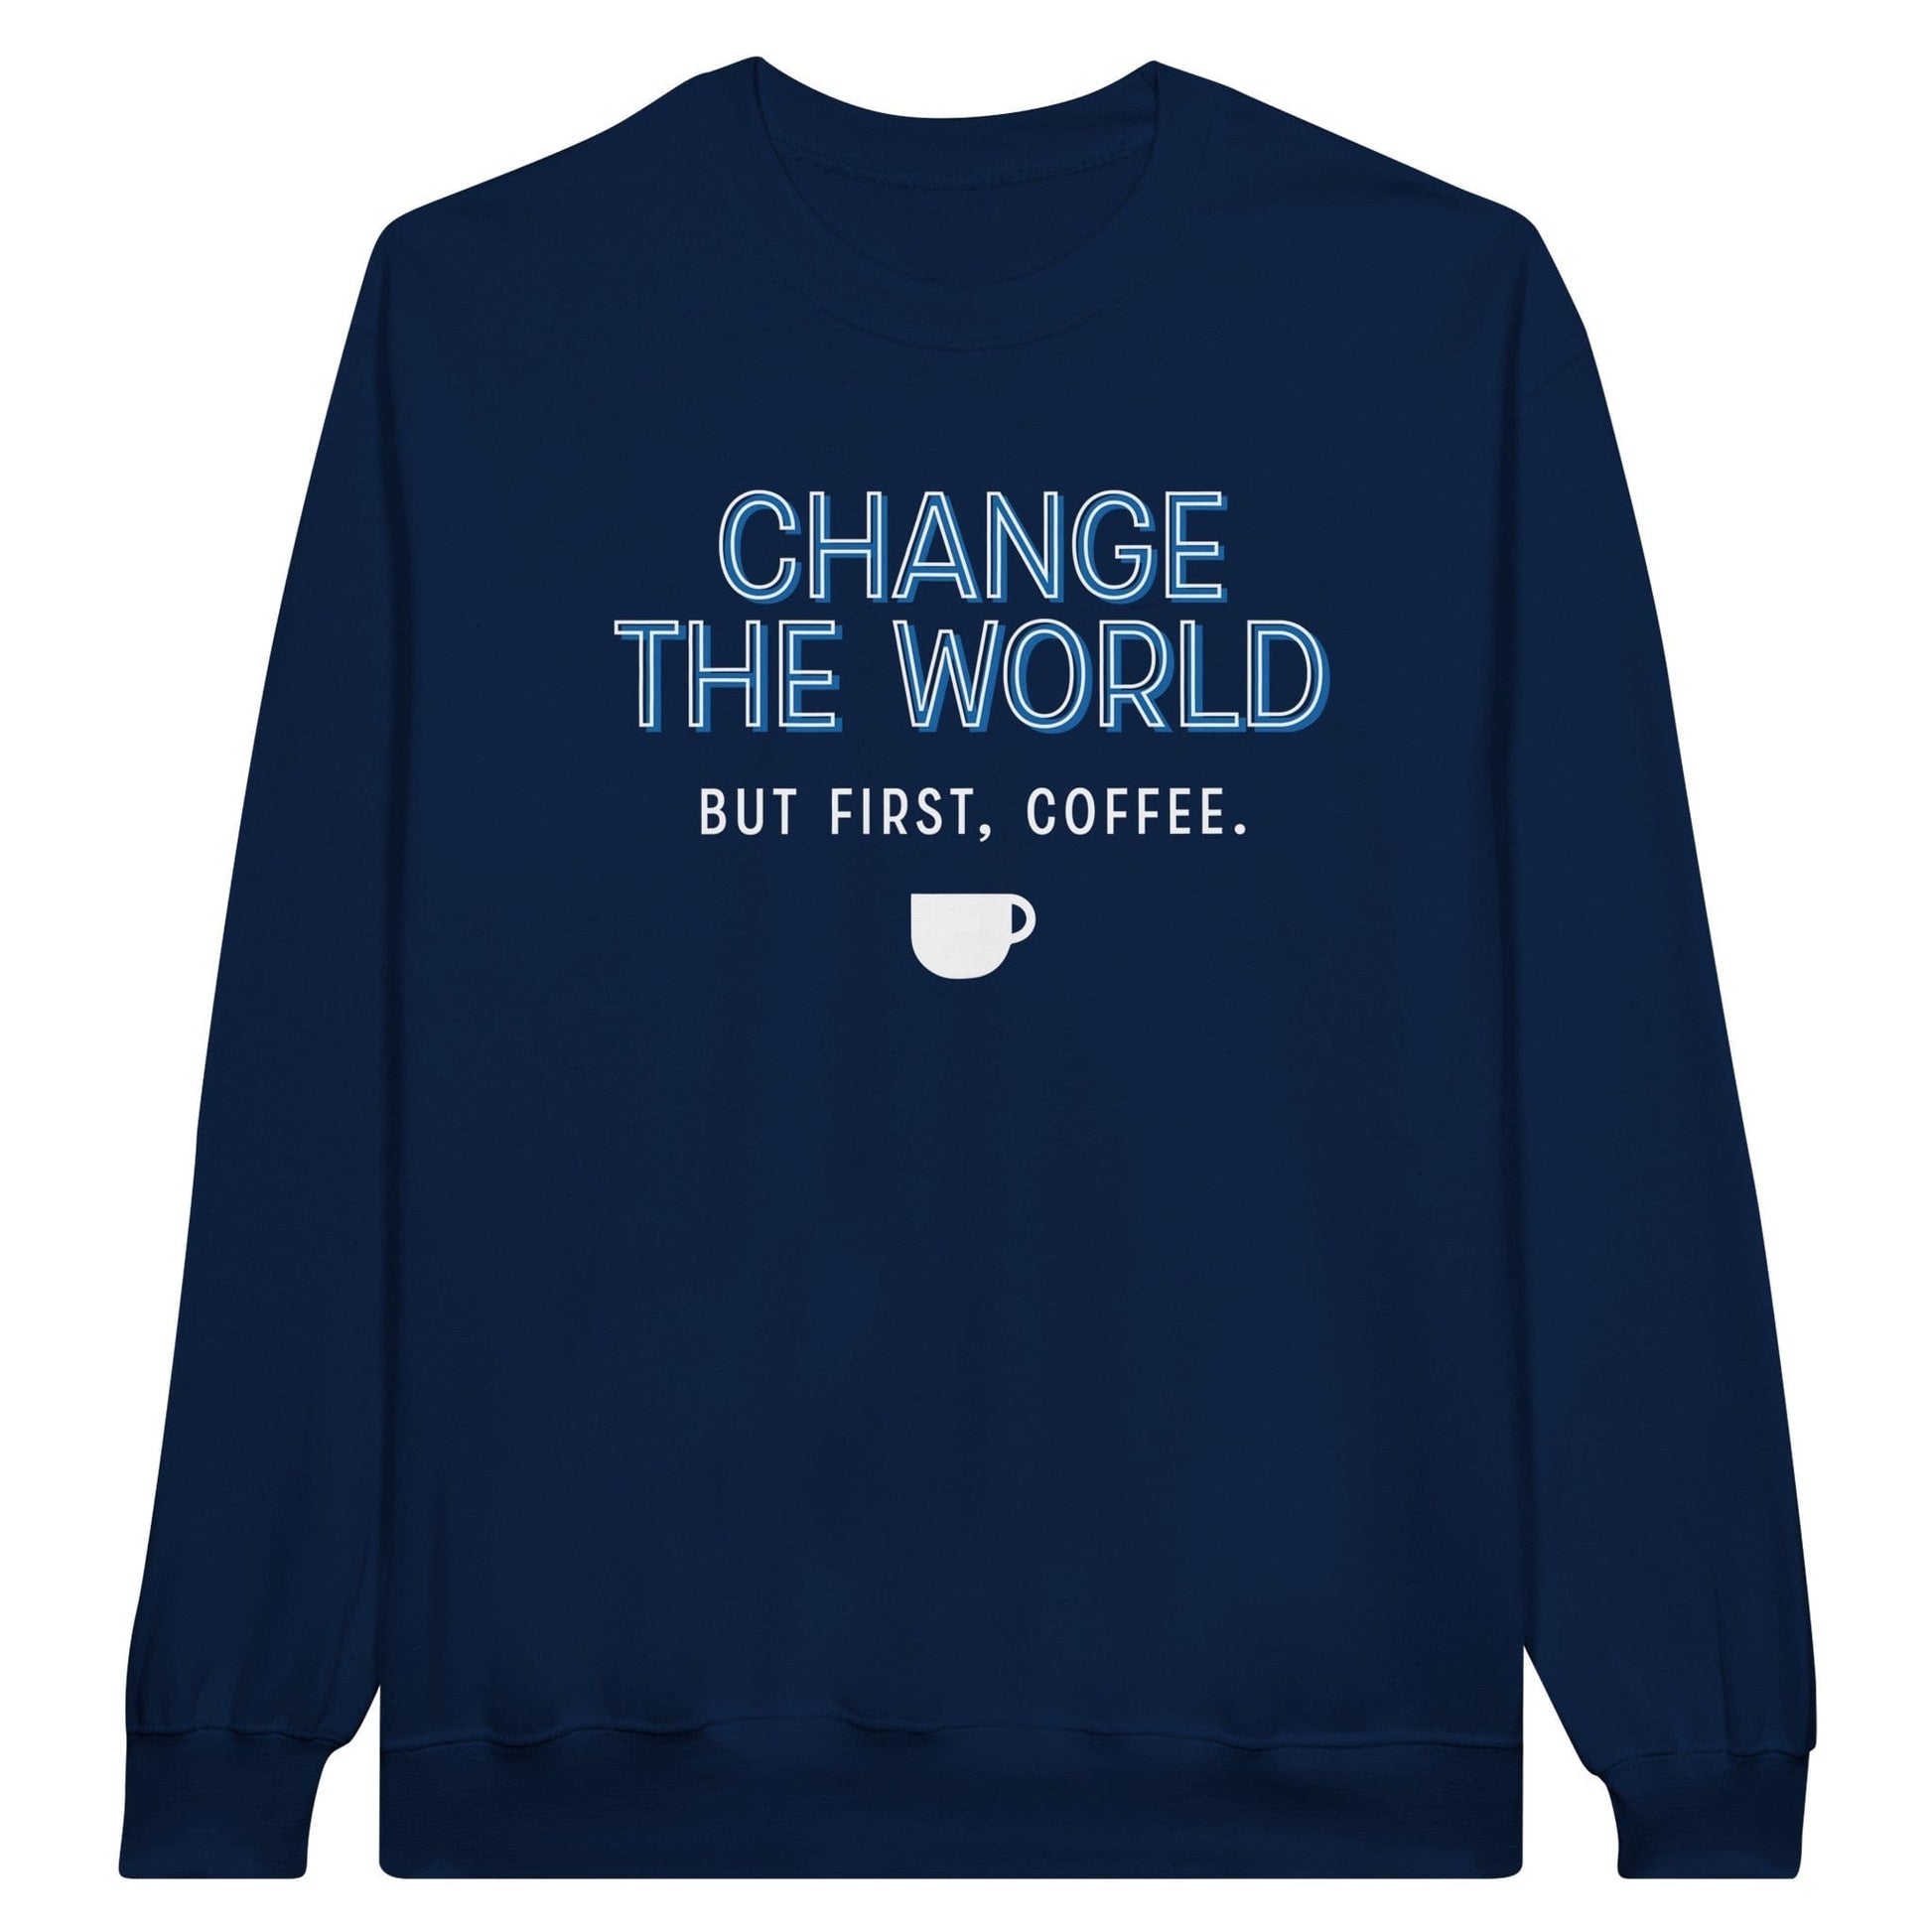 Good Bean Gifts "Change The World - But First Coffee" - Classic Crewneck Sweatshirt S / Navy